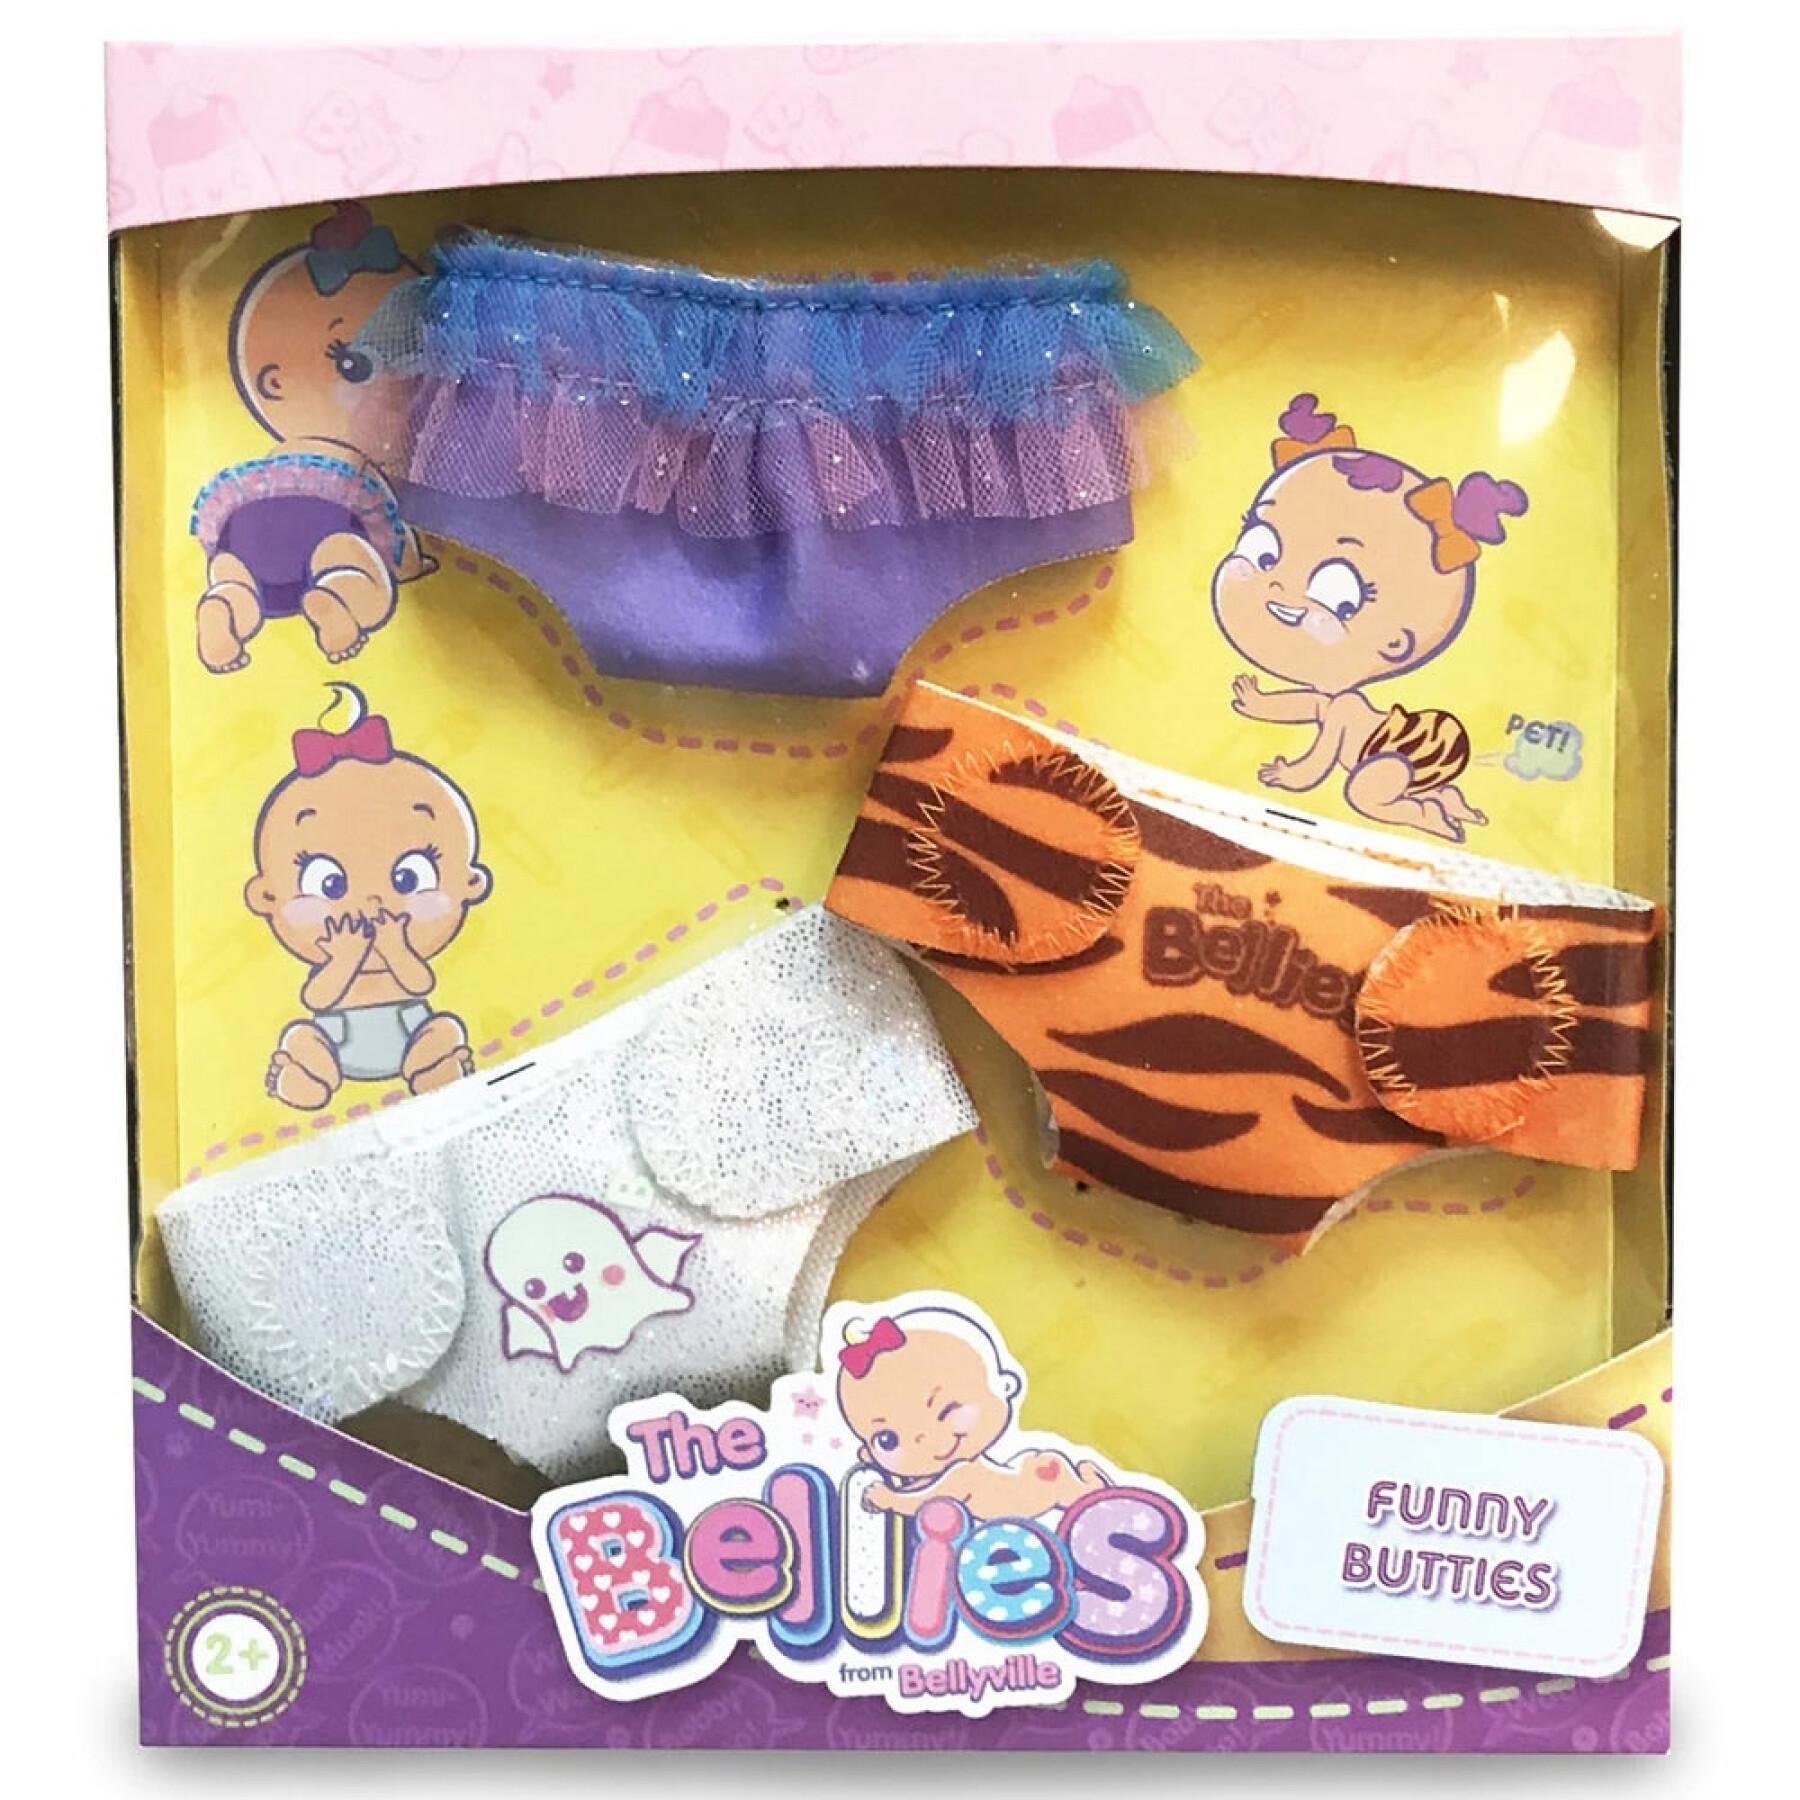 Decorated doll diapers Bellies (x3)